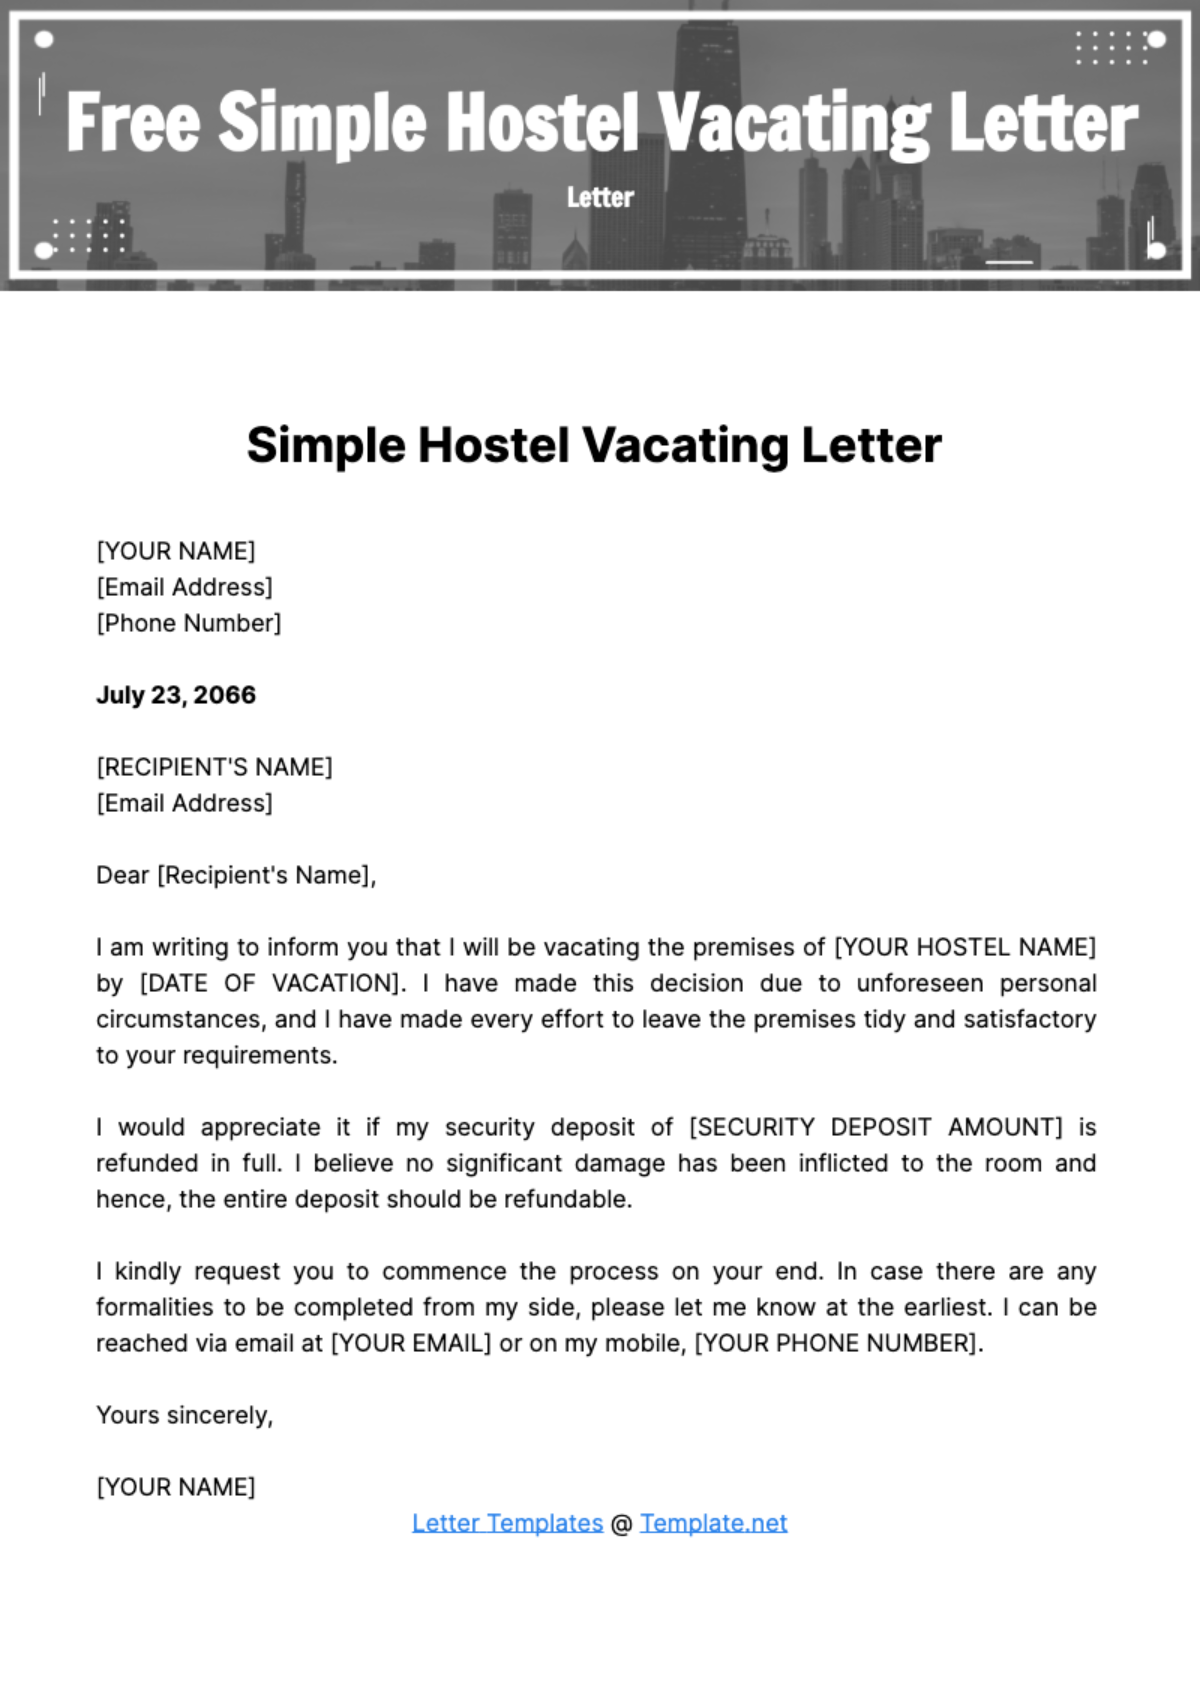 Free Simple Hostel Vacating Letter Template